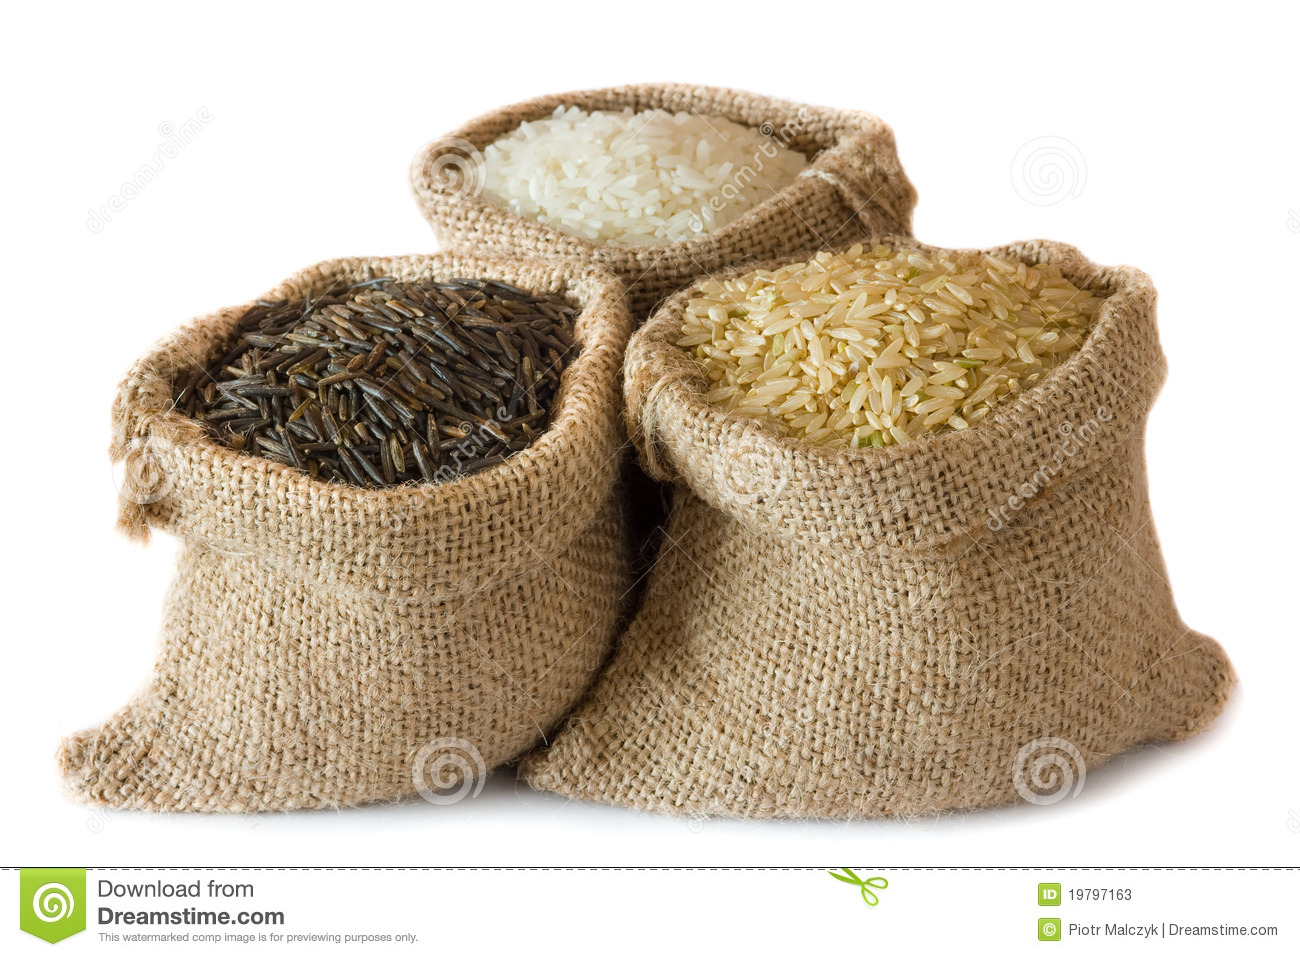 Three Kinds Of Rice In Small Burlap Bags Isolated On White Background 